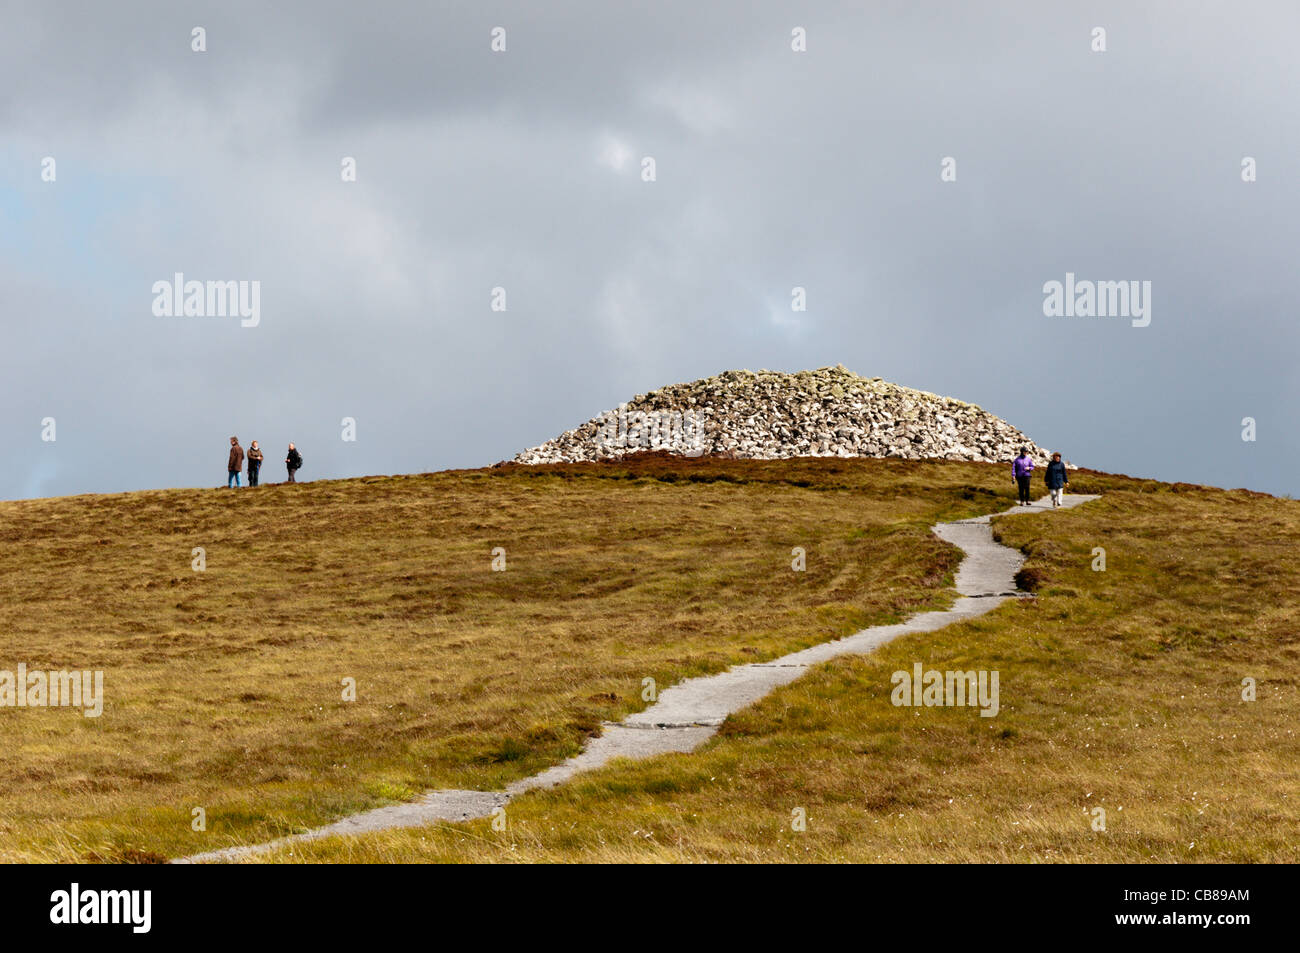 Barpa Langass chambered cairn on the island of North Uist in the Outer Hebrides, Scotland Stock Photo